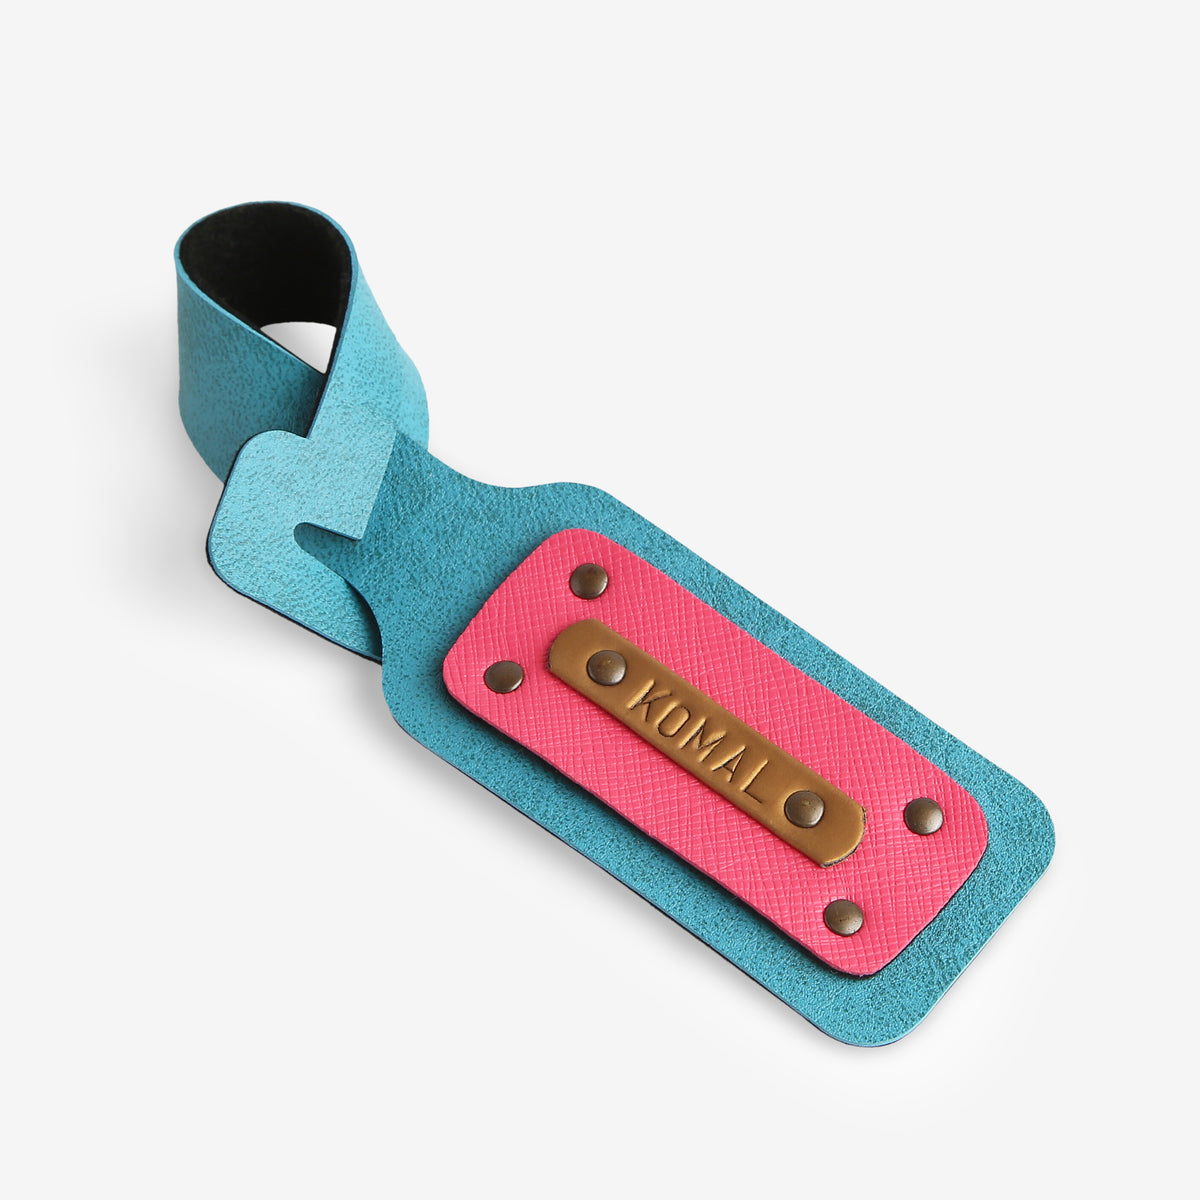 PERSONALISED LEATHER LUGGAGE/BAGGAGE TAG - LIGHT BLUE